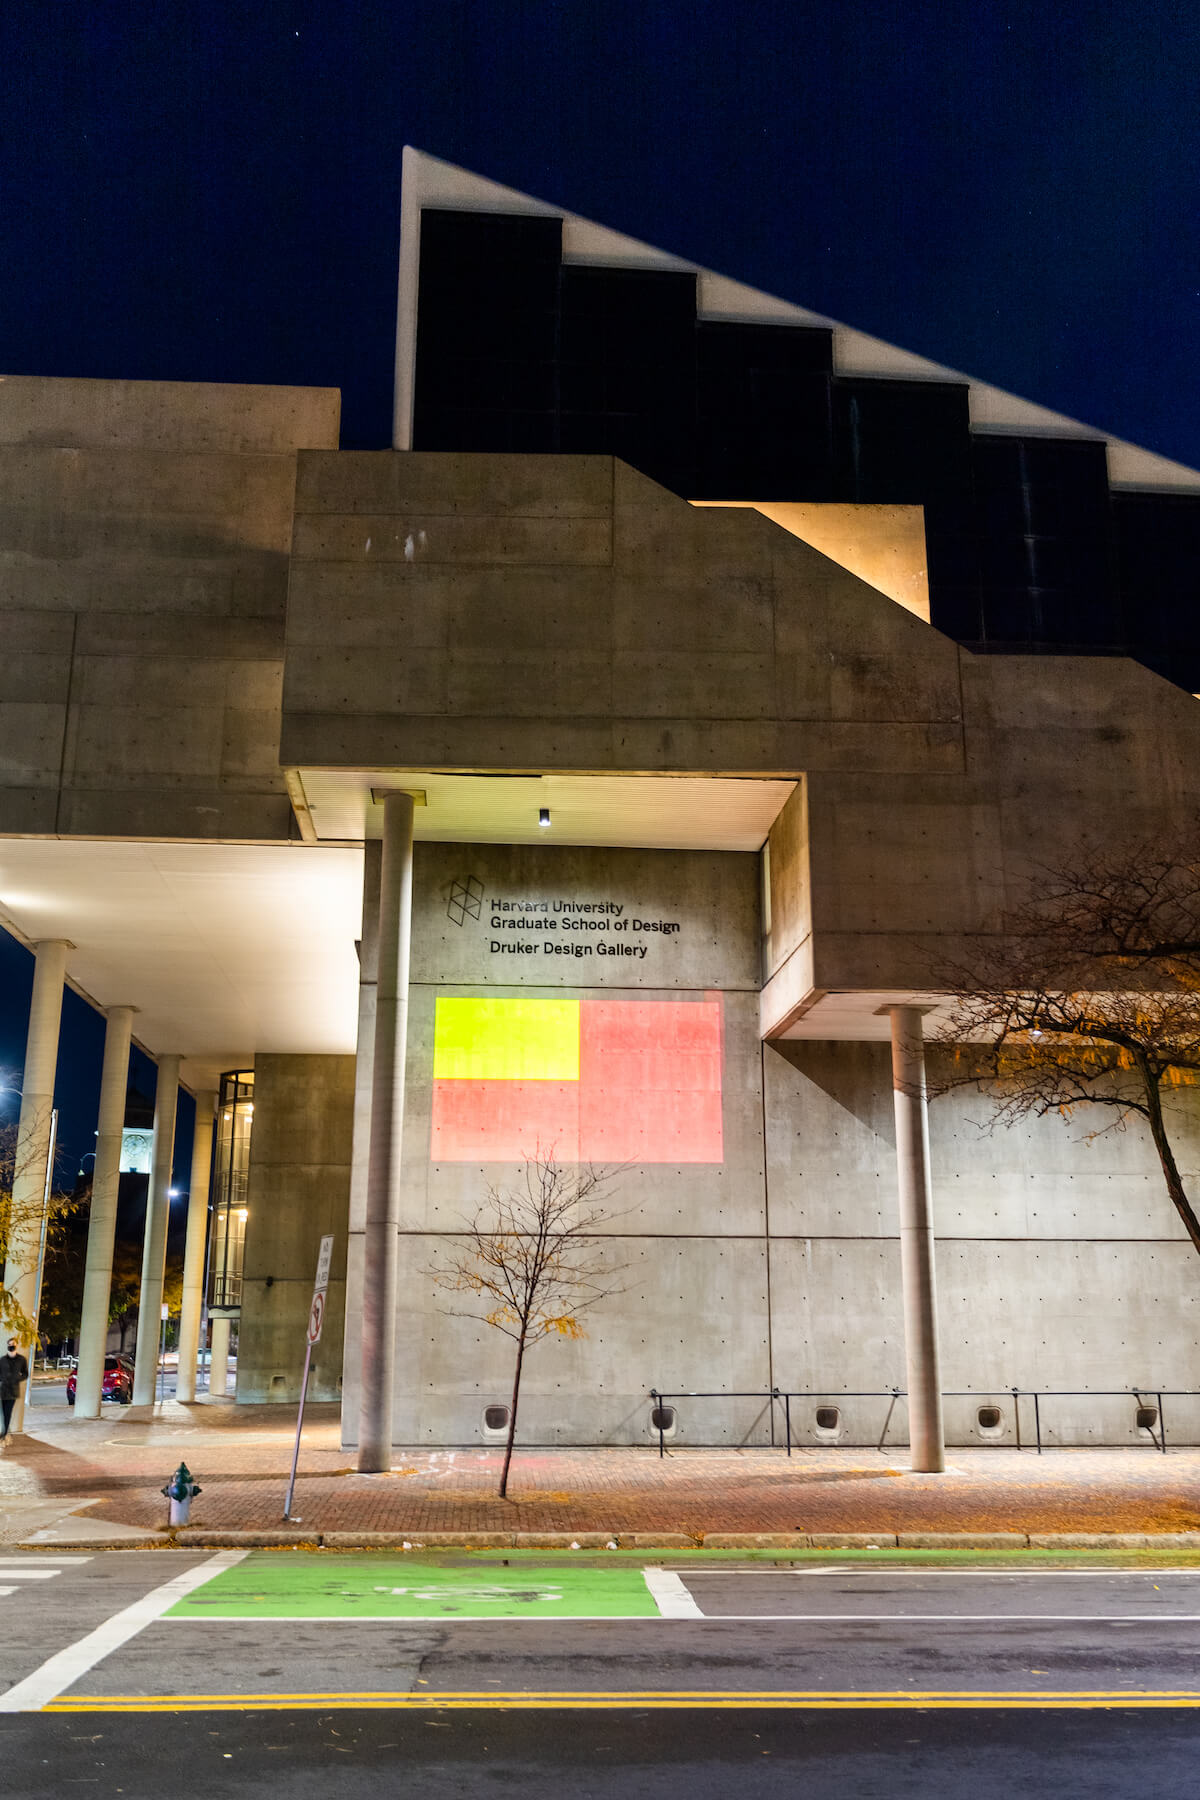 Gund Hall at night with projection illuminated on the side of the building.